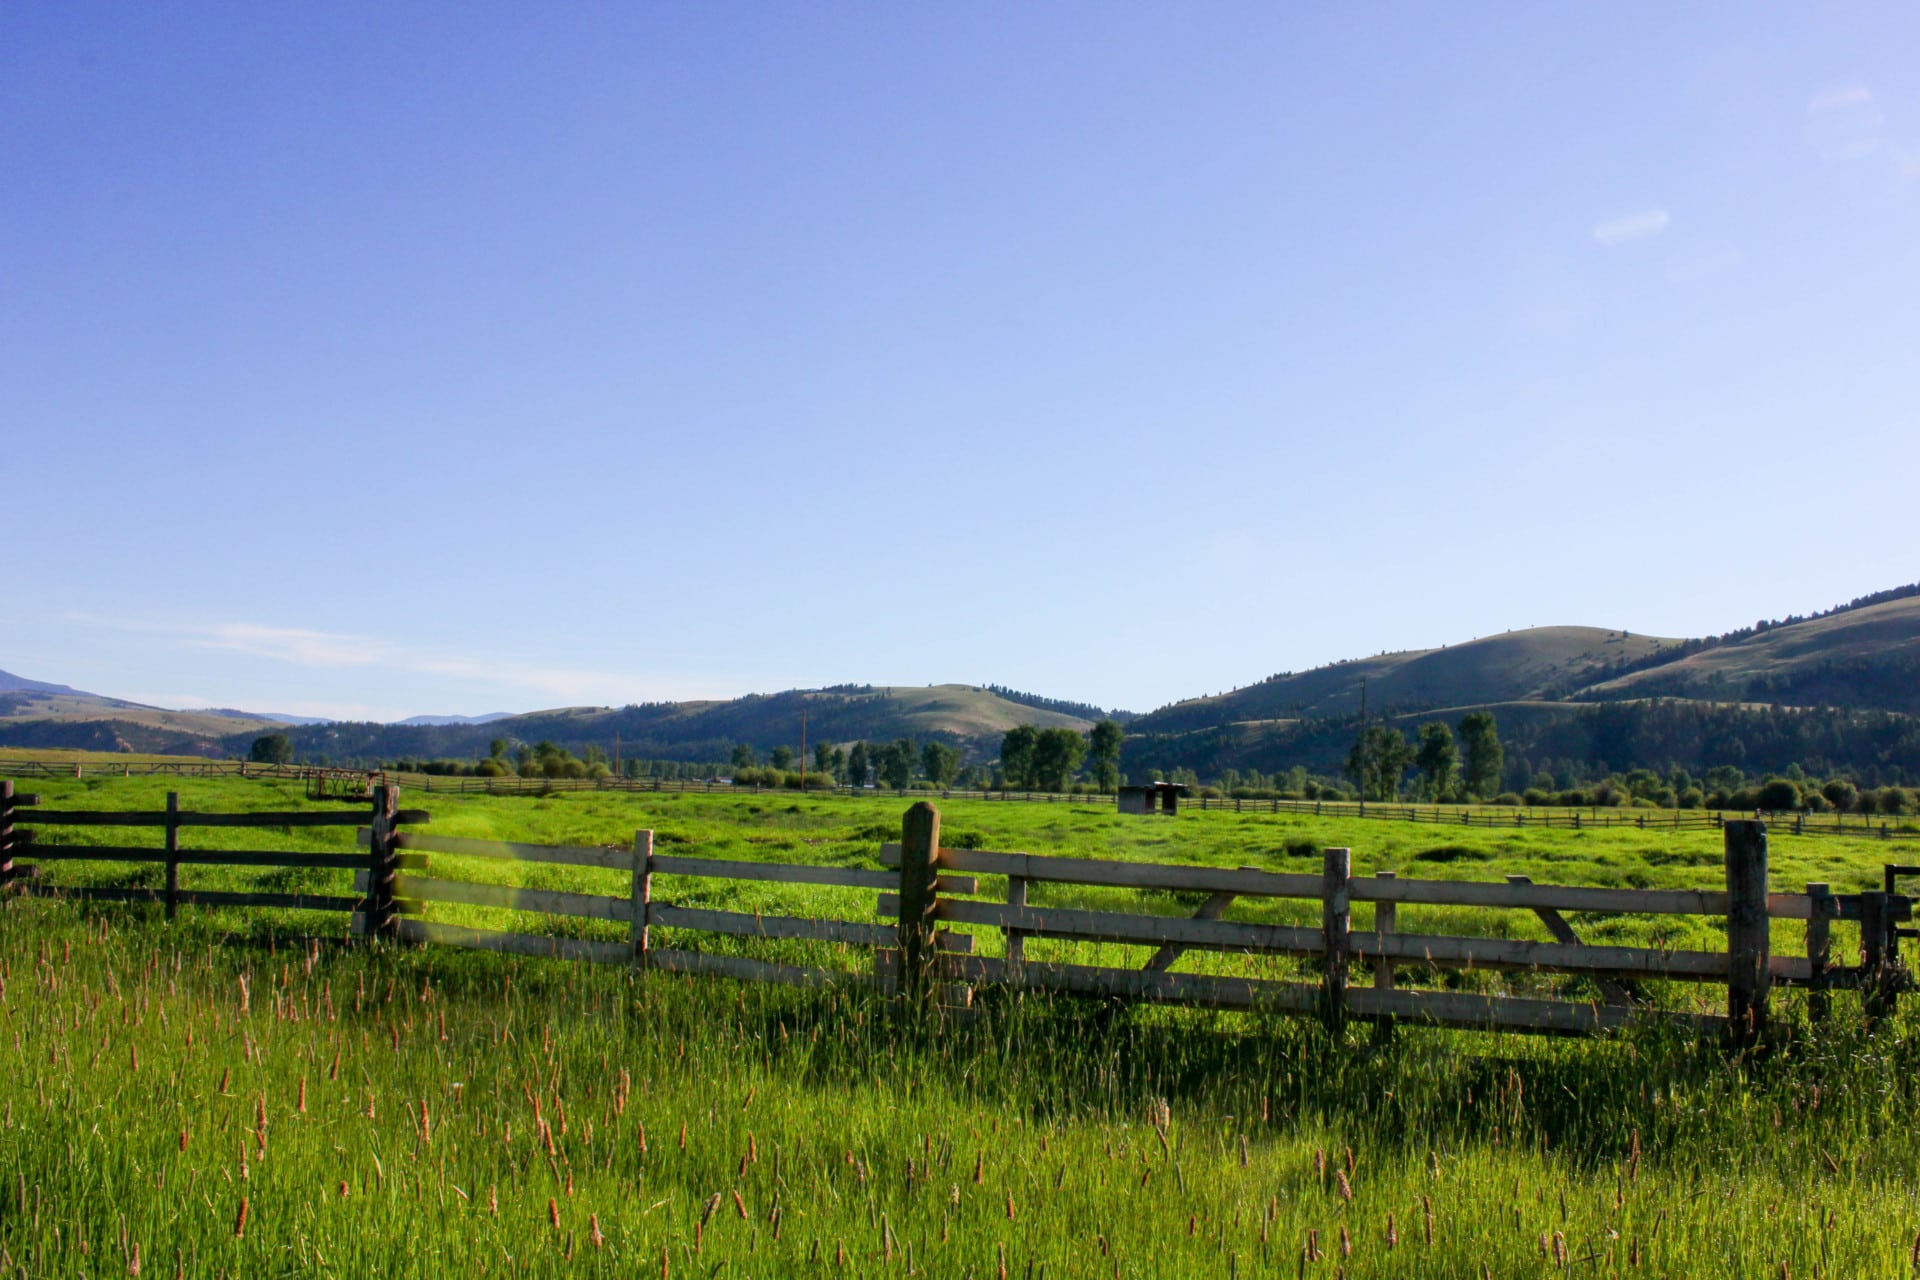 Land only for sale Montana Rock Creek Cattle Ranch